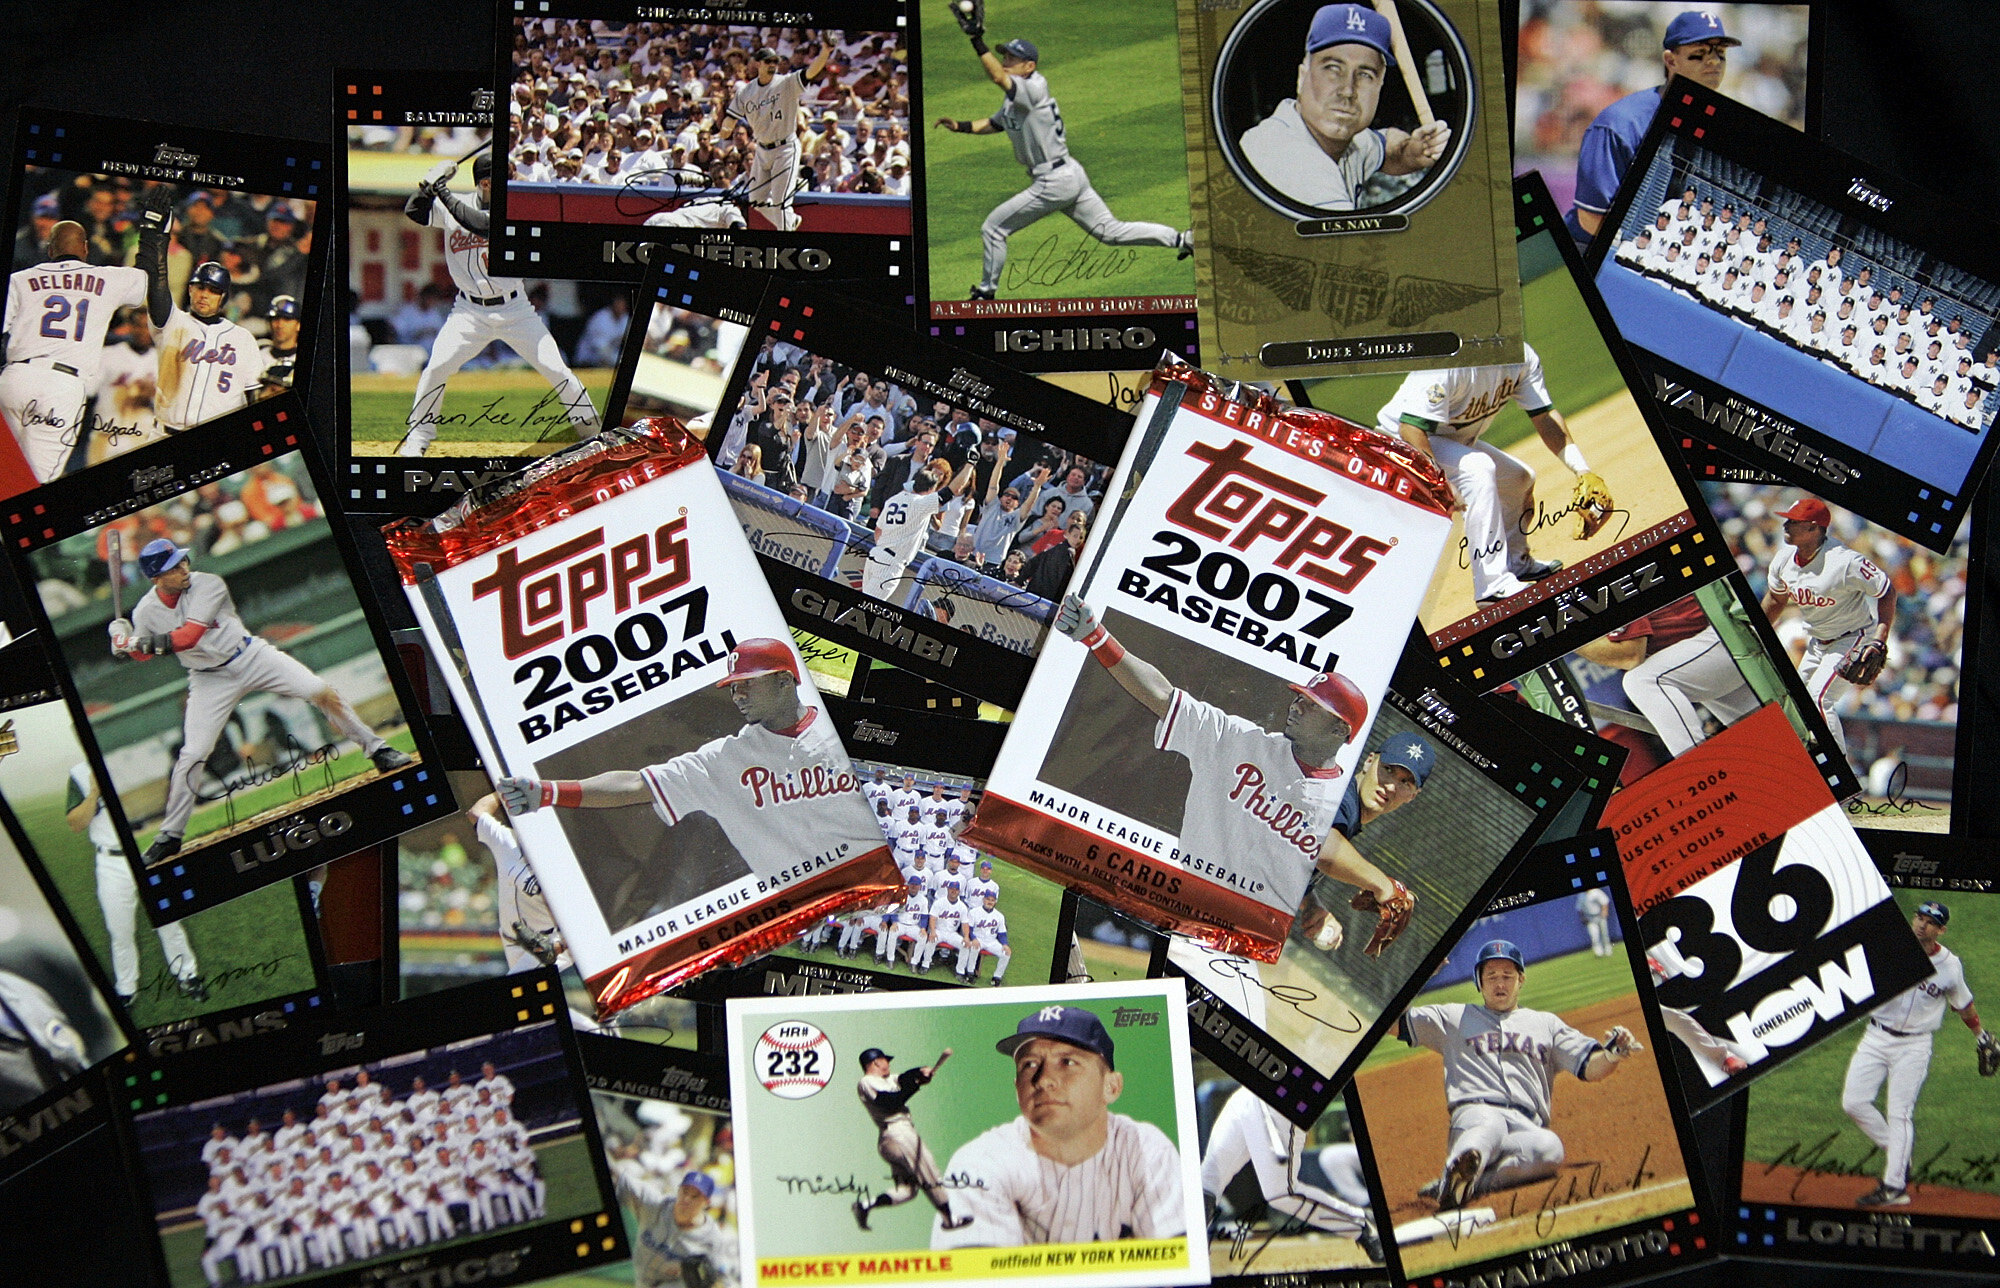 Got any old 'junk' around? From T-shirts to baseball cards, here's